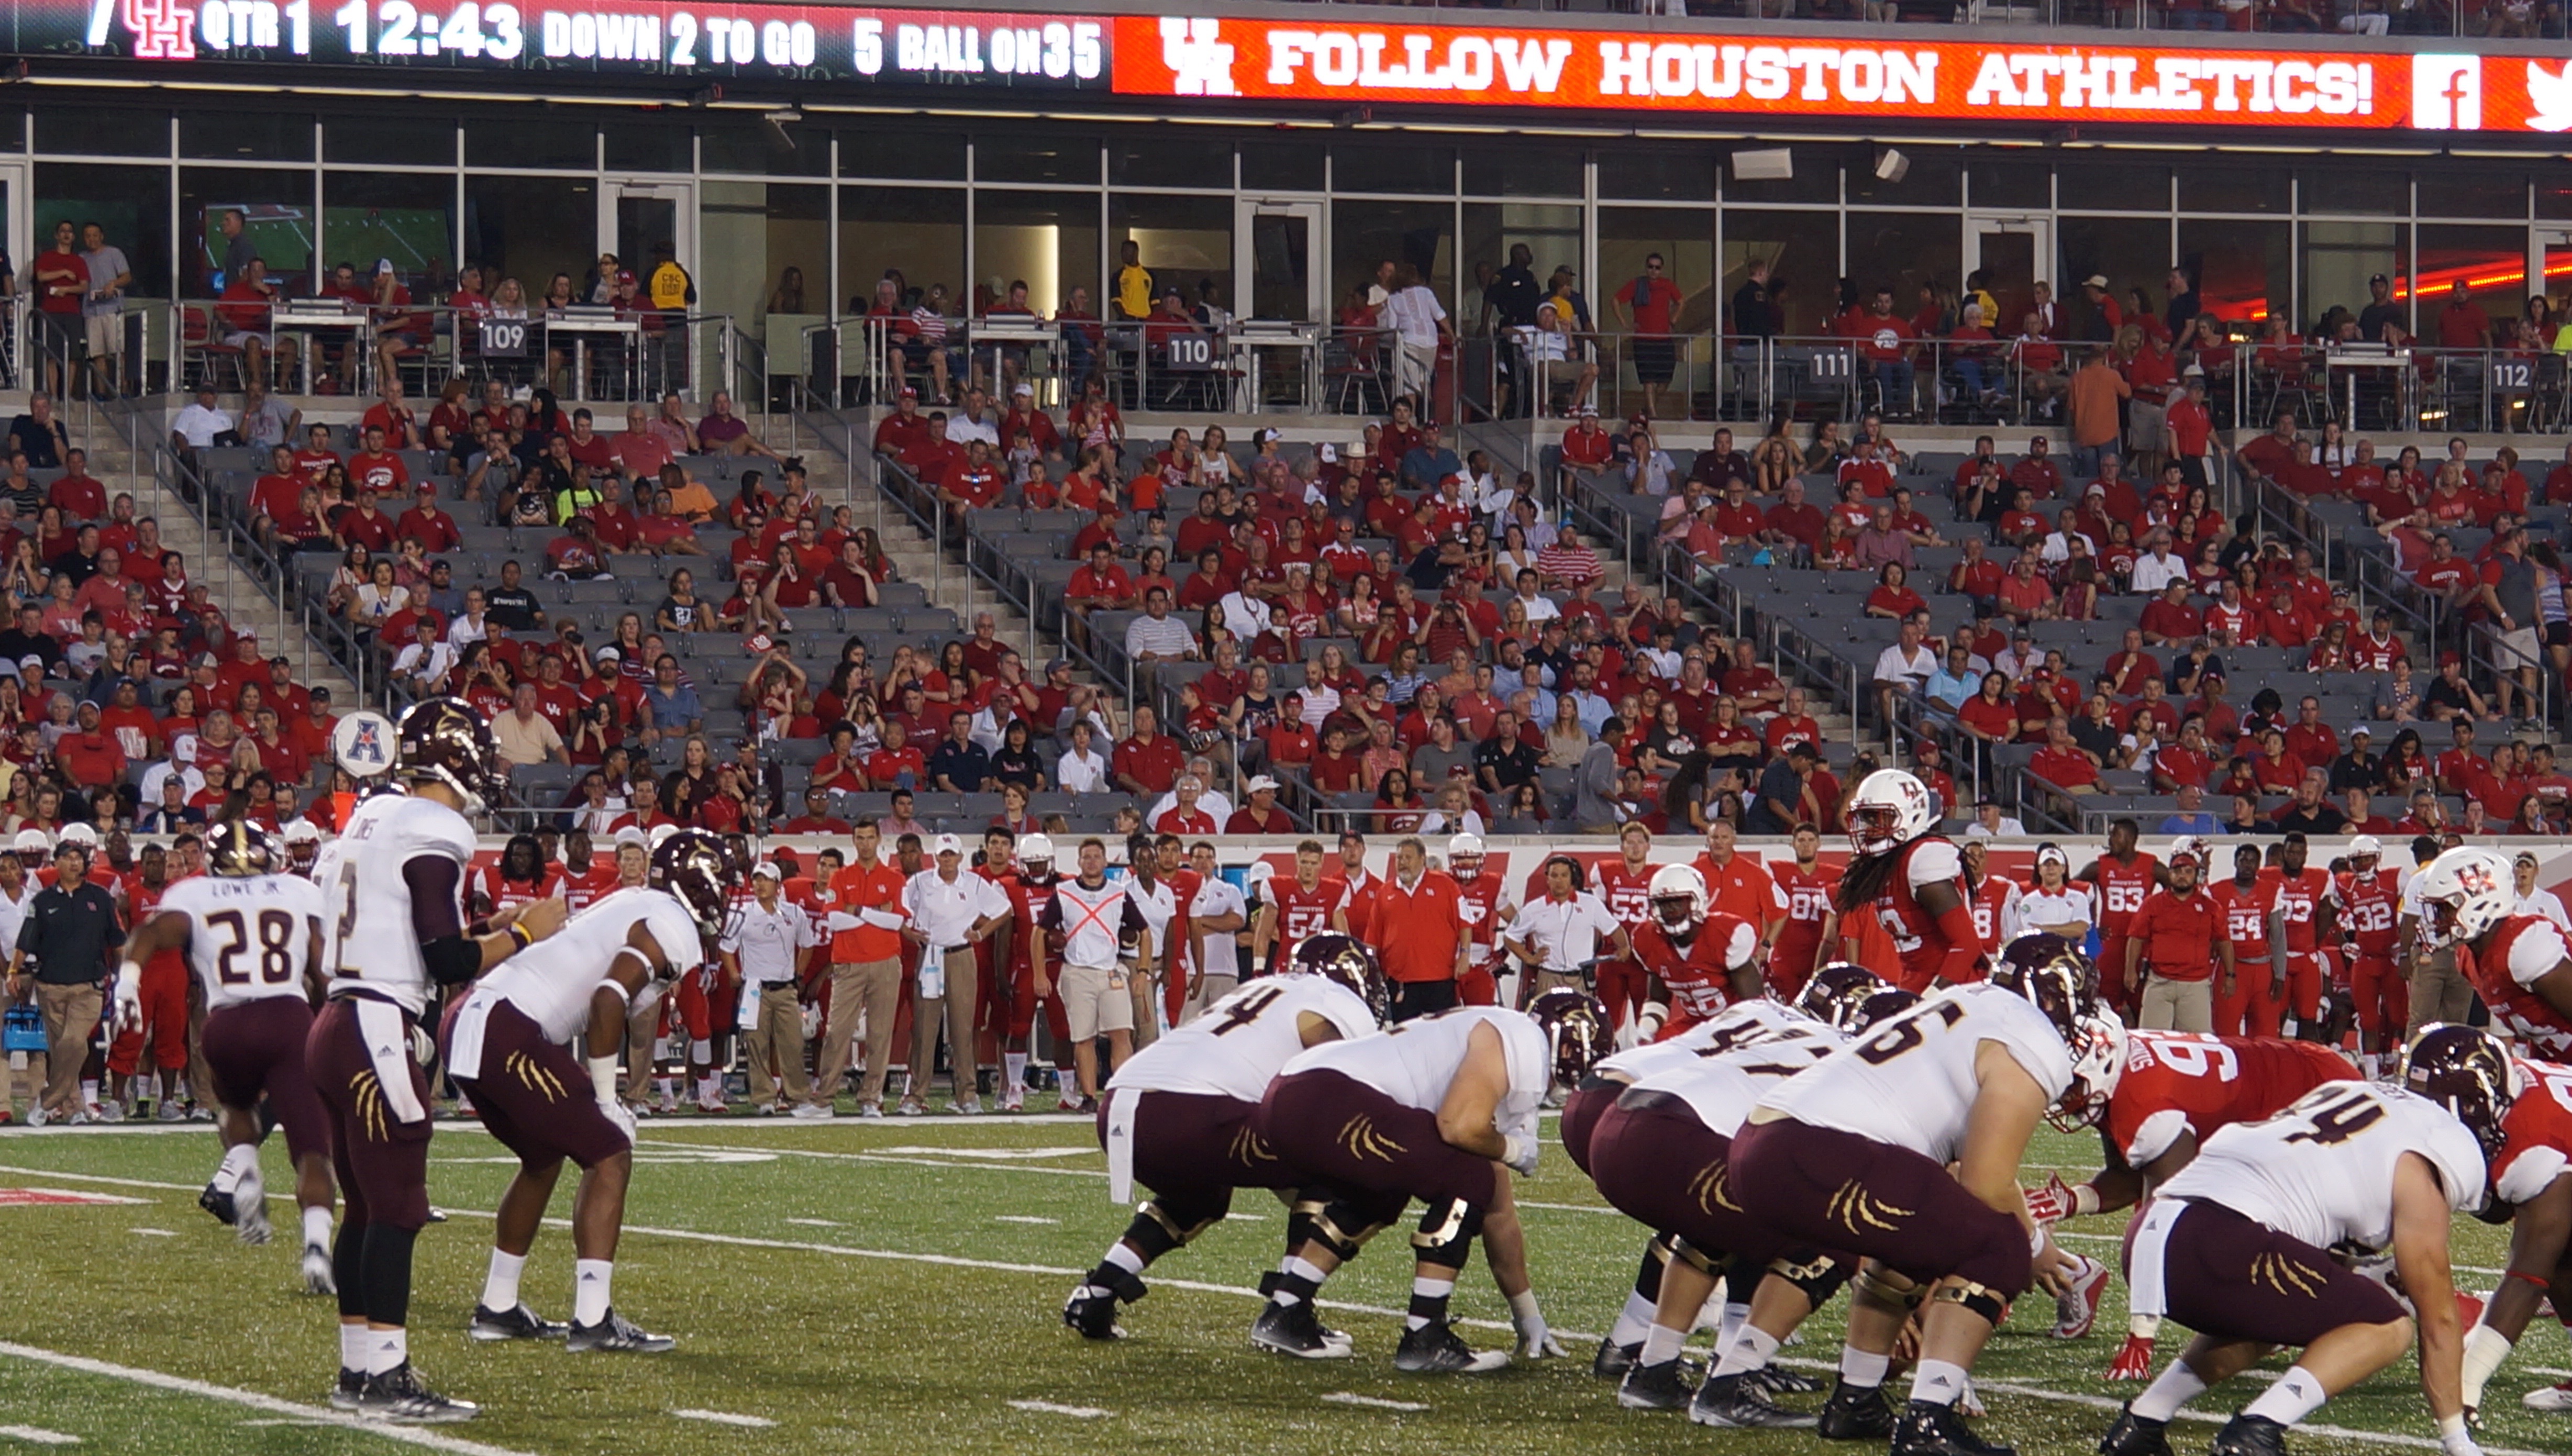 Saturday's game will be the first time in three years that UH will play at Bobcat Stadium. Photo by Kiersten Ehr.